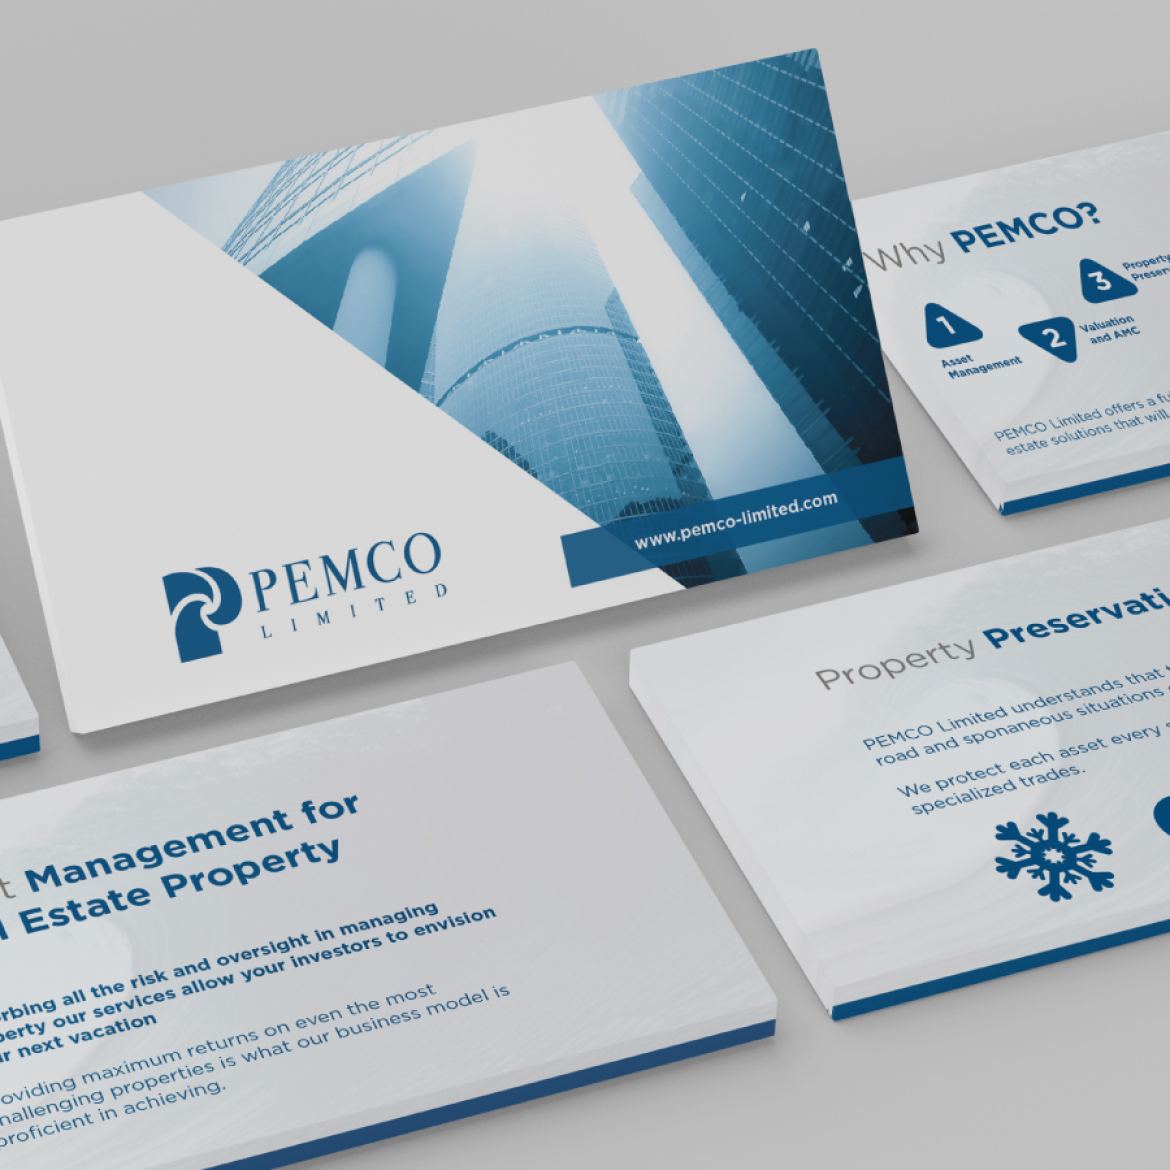 Pemco Limited - Real Estate